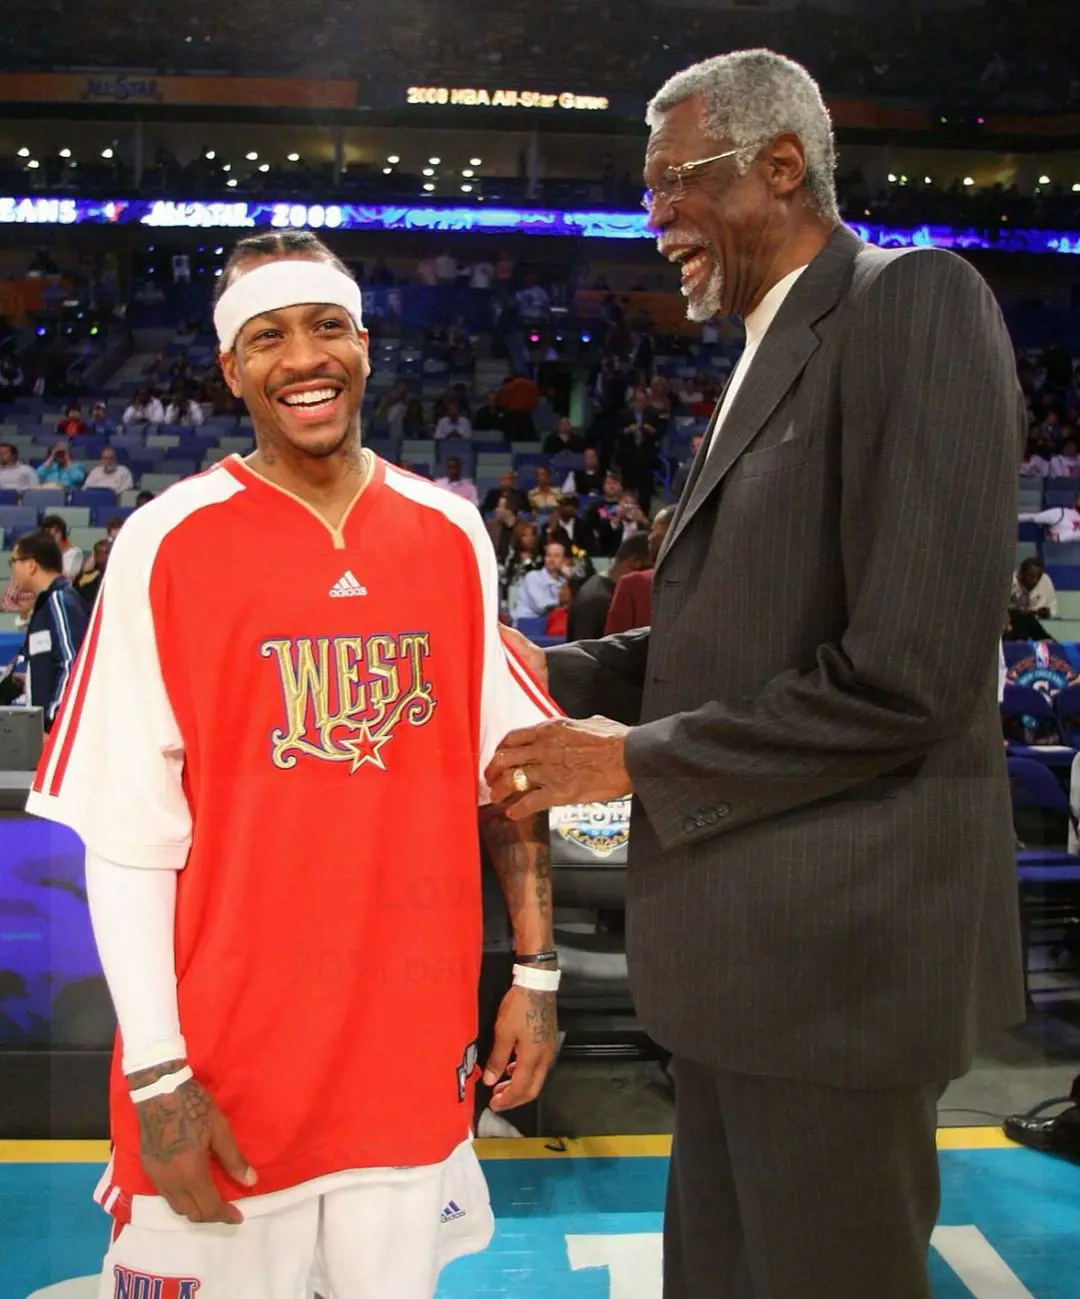 Iverson sharing a light moment with the legendary Bill Russel.